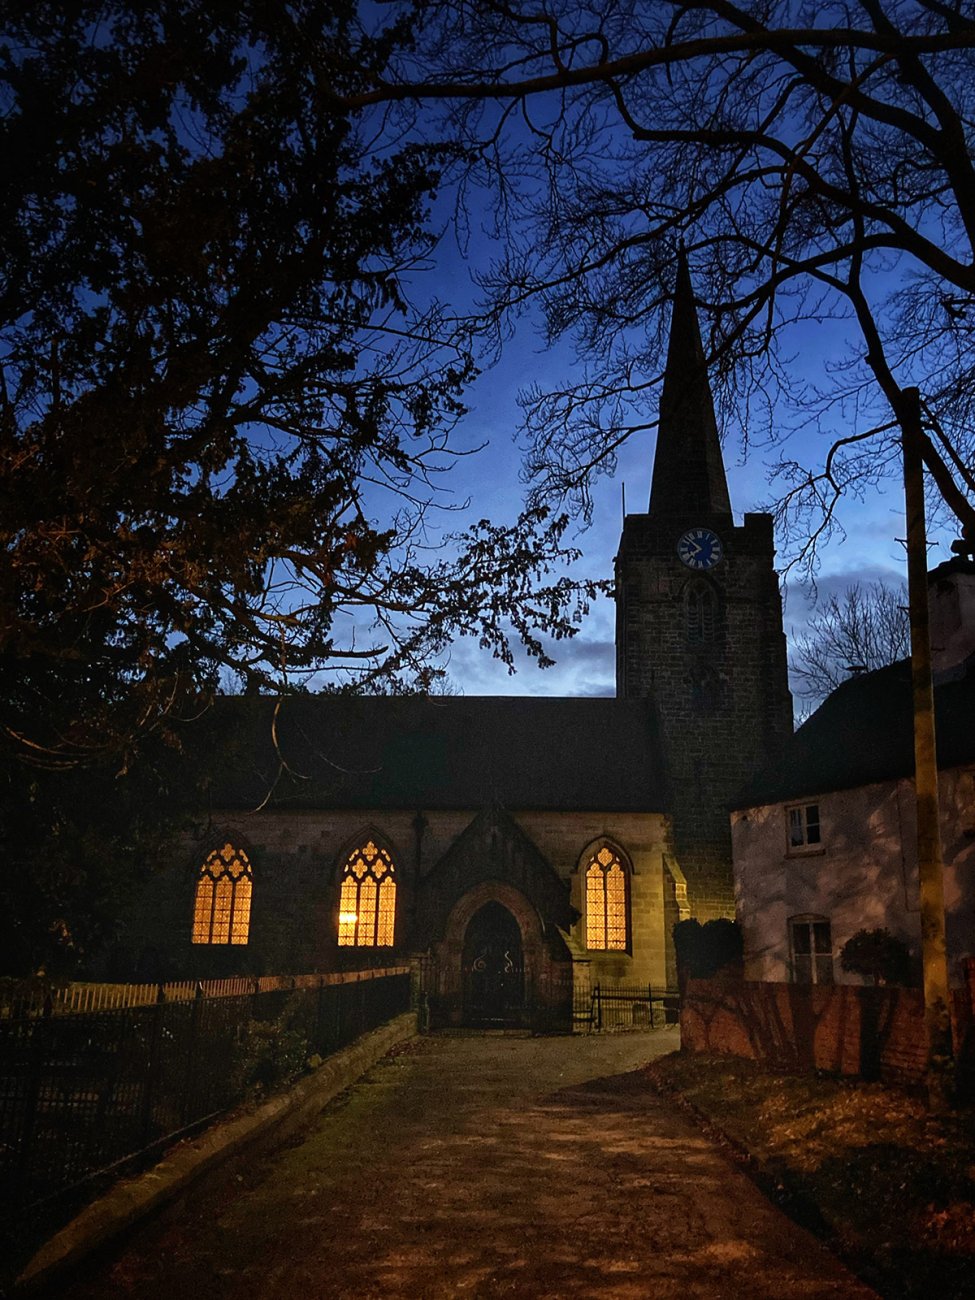 Photograph of Welcoming lights in the evening from St Werburgh's